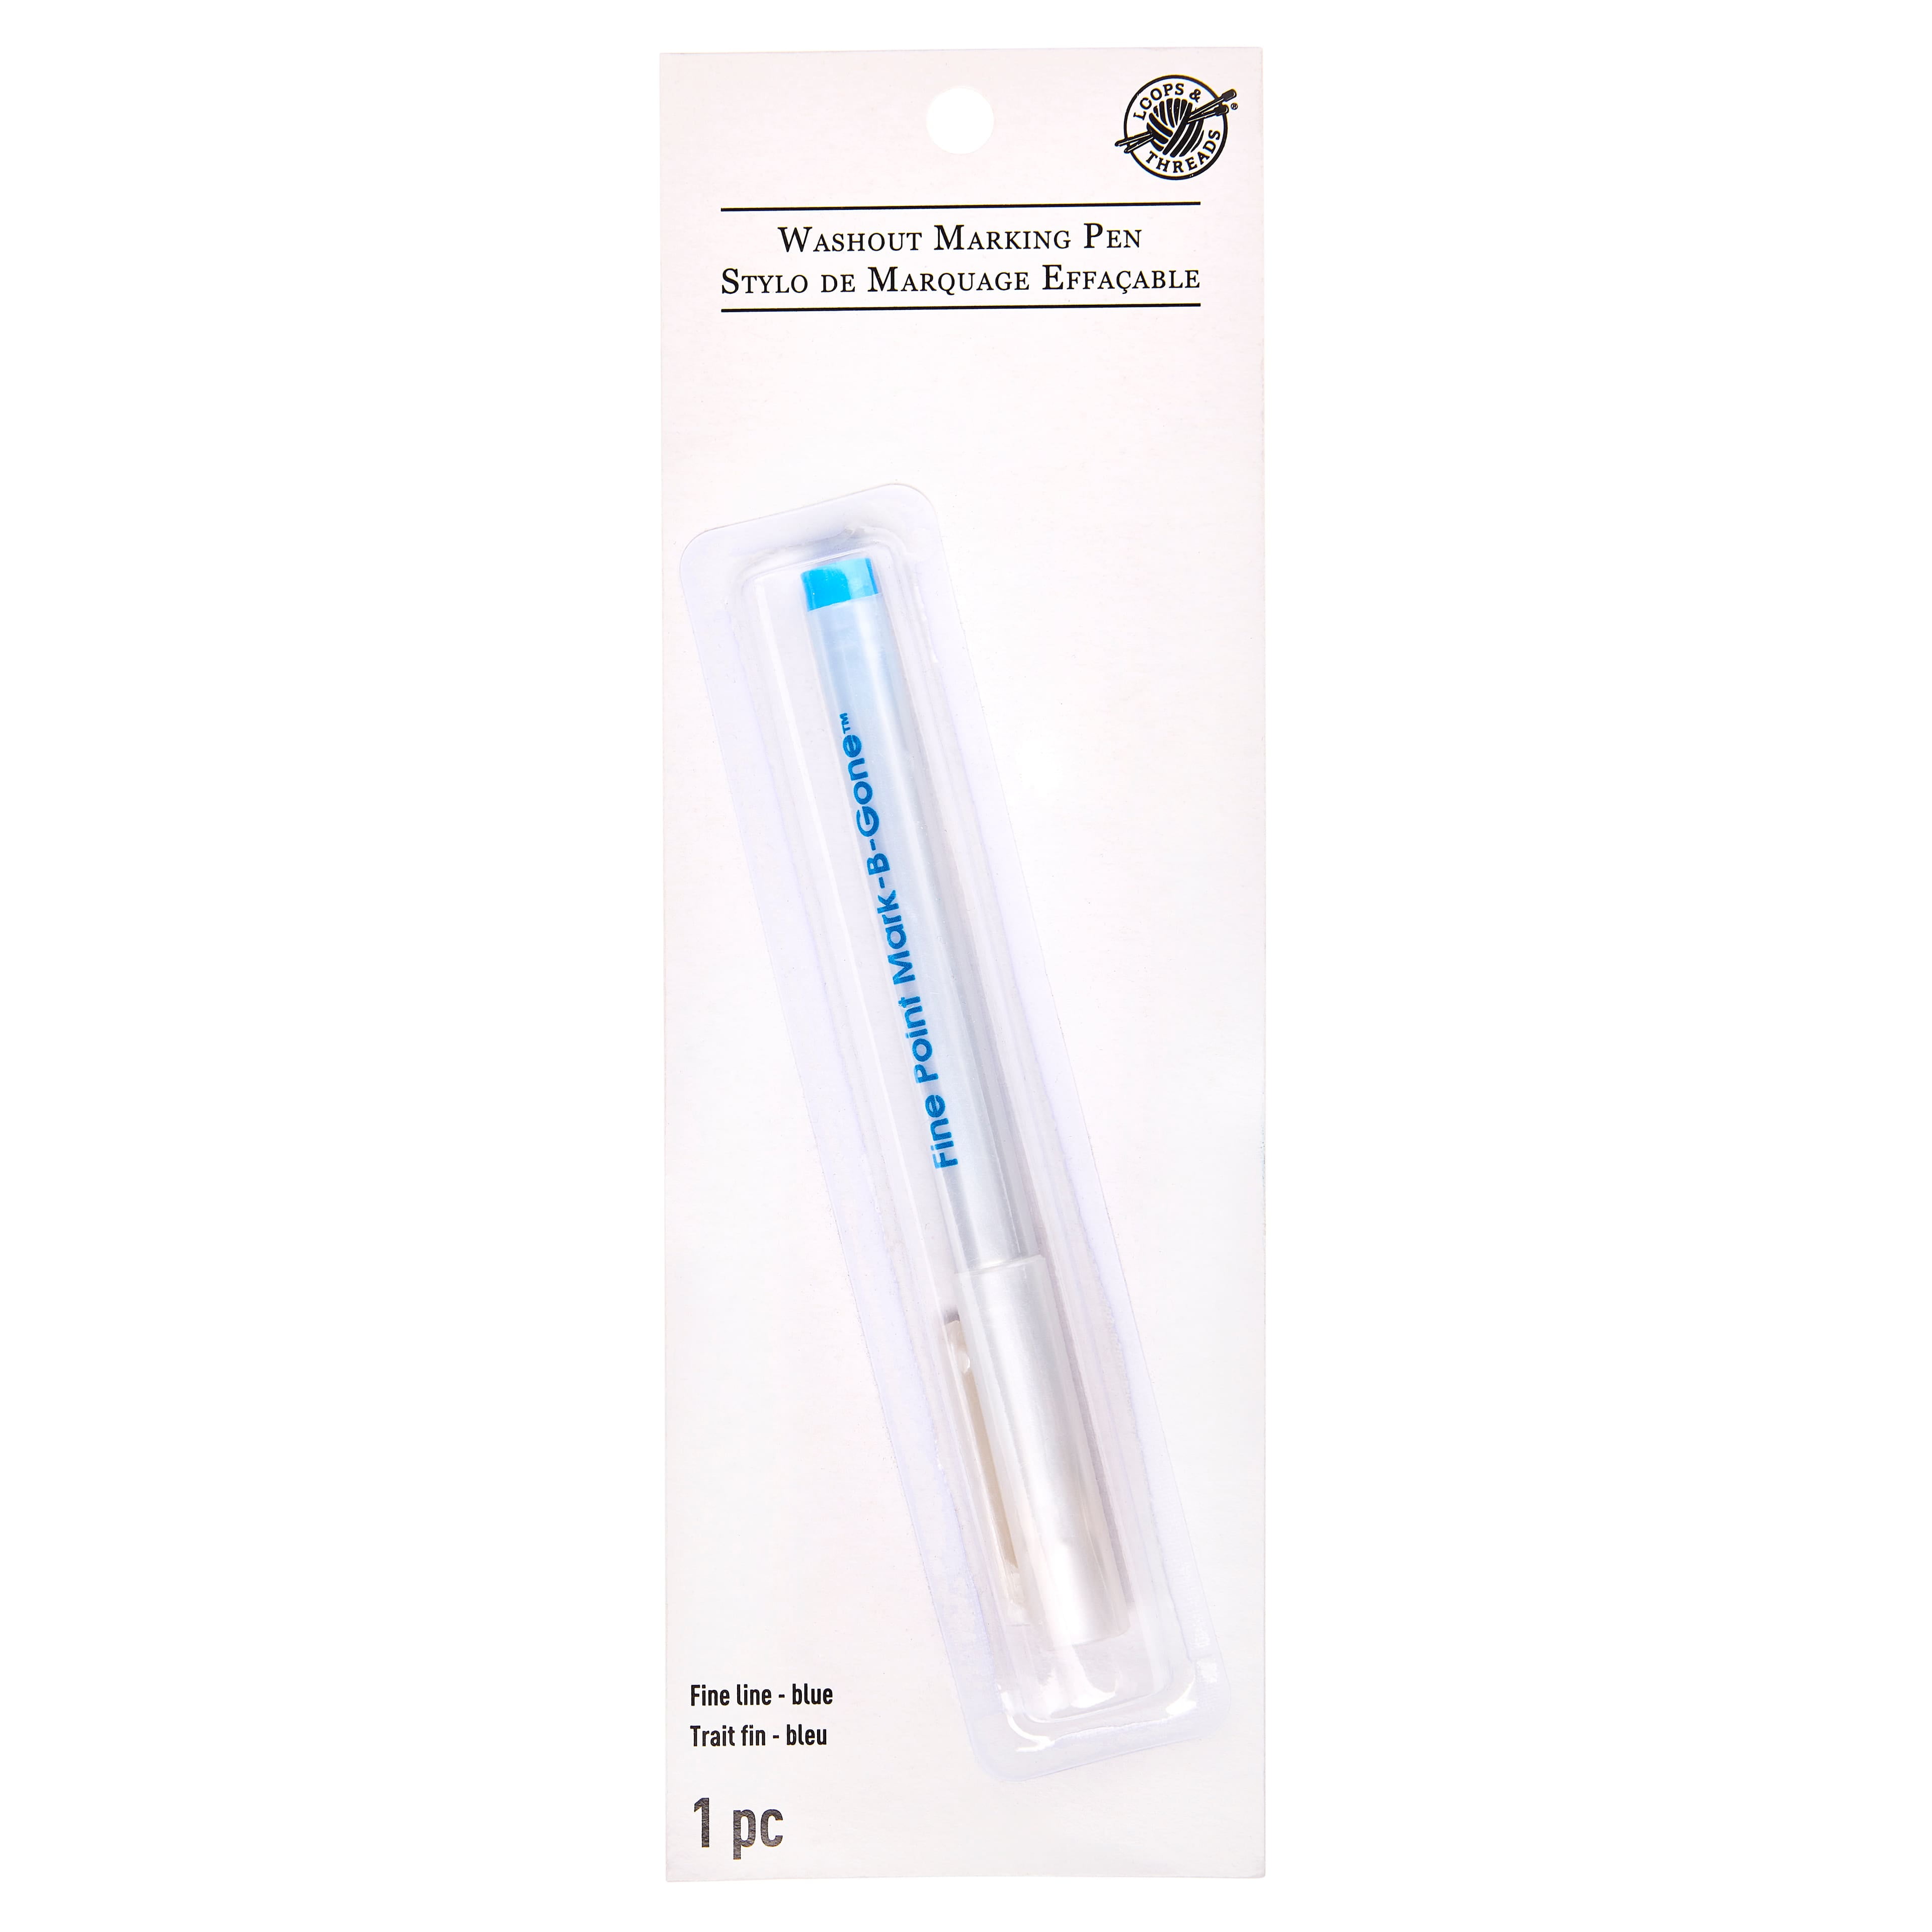 LEONIS Water Erasable Fabric Marking Pen Blue 5 5 Count (Pack of 1), White